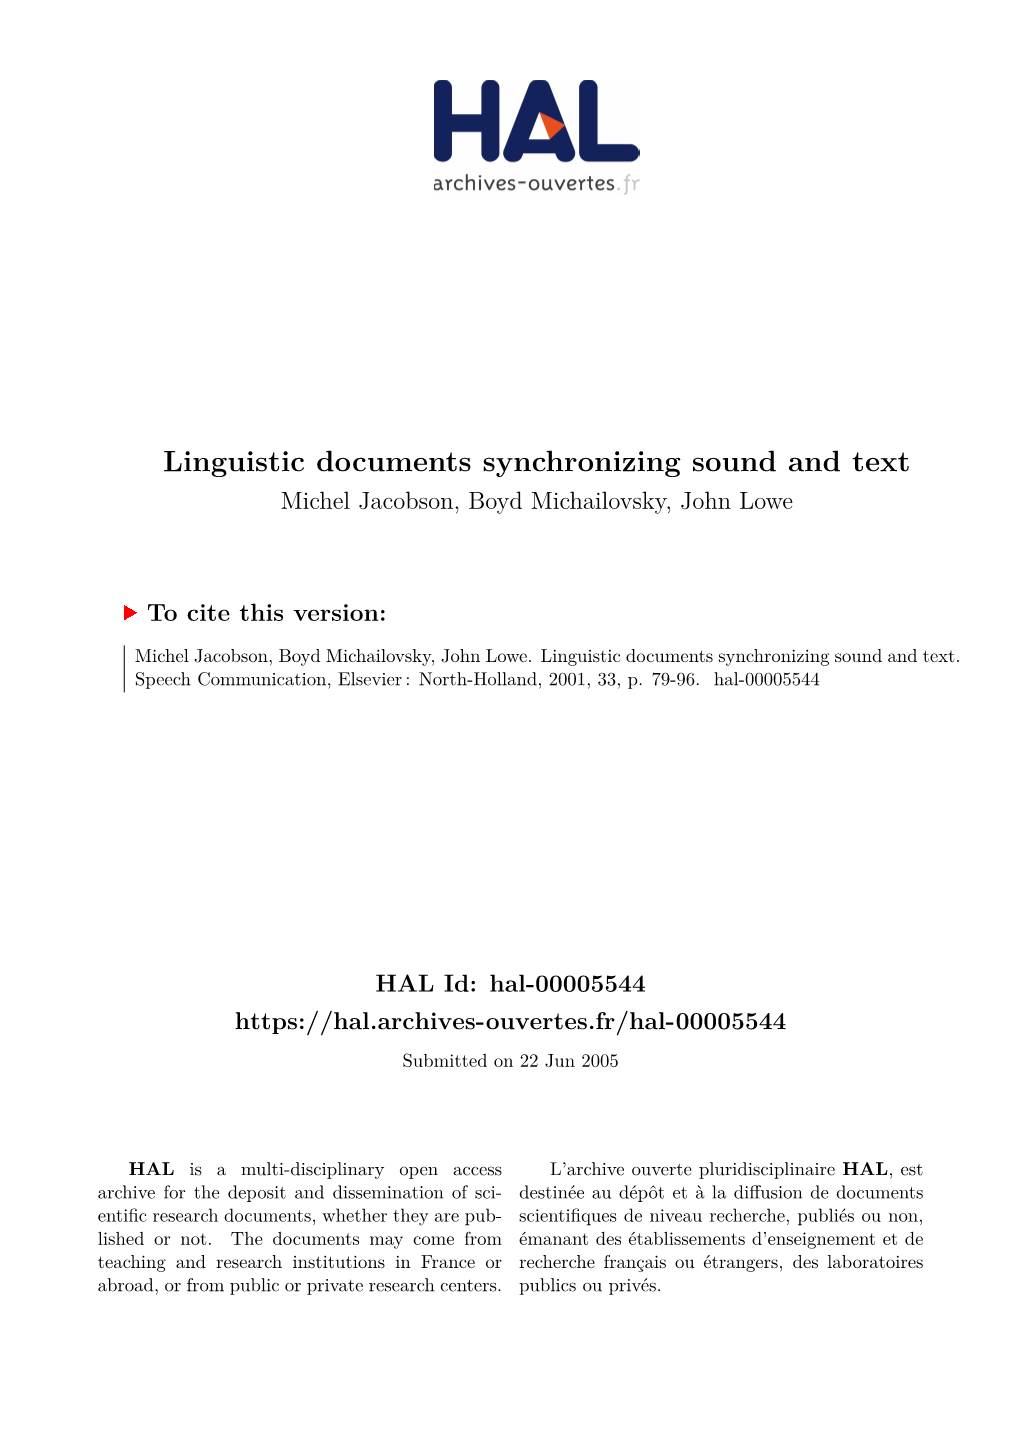 Linguistic Documents Synchronizing Sound and Text Michel Jacobson, Boyd Michailovsky, John Lowe